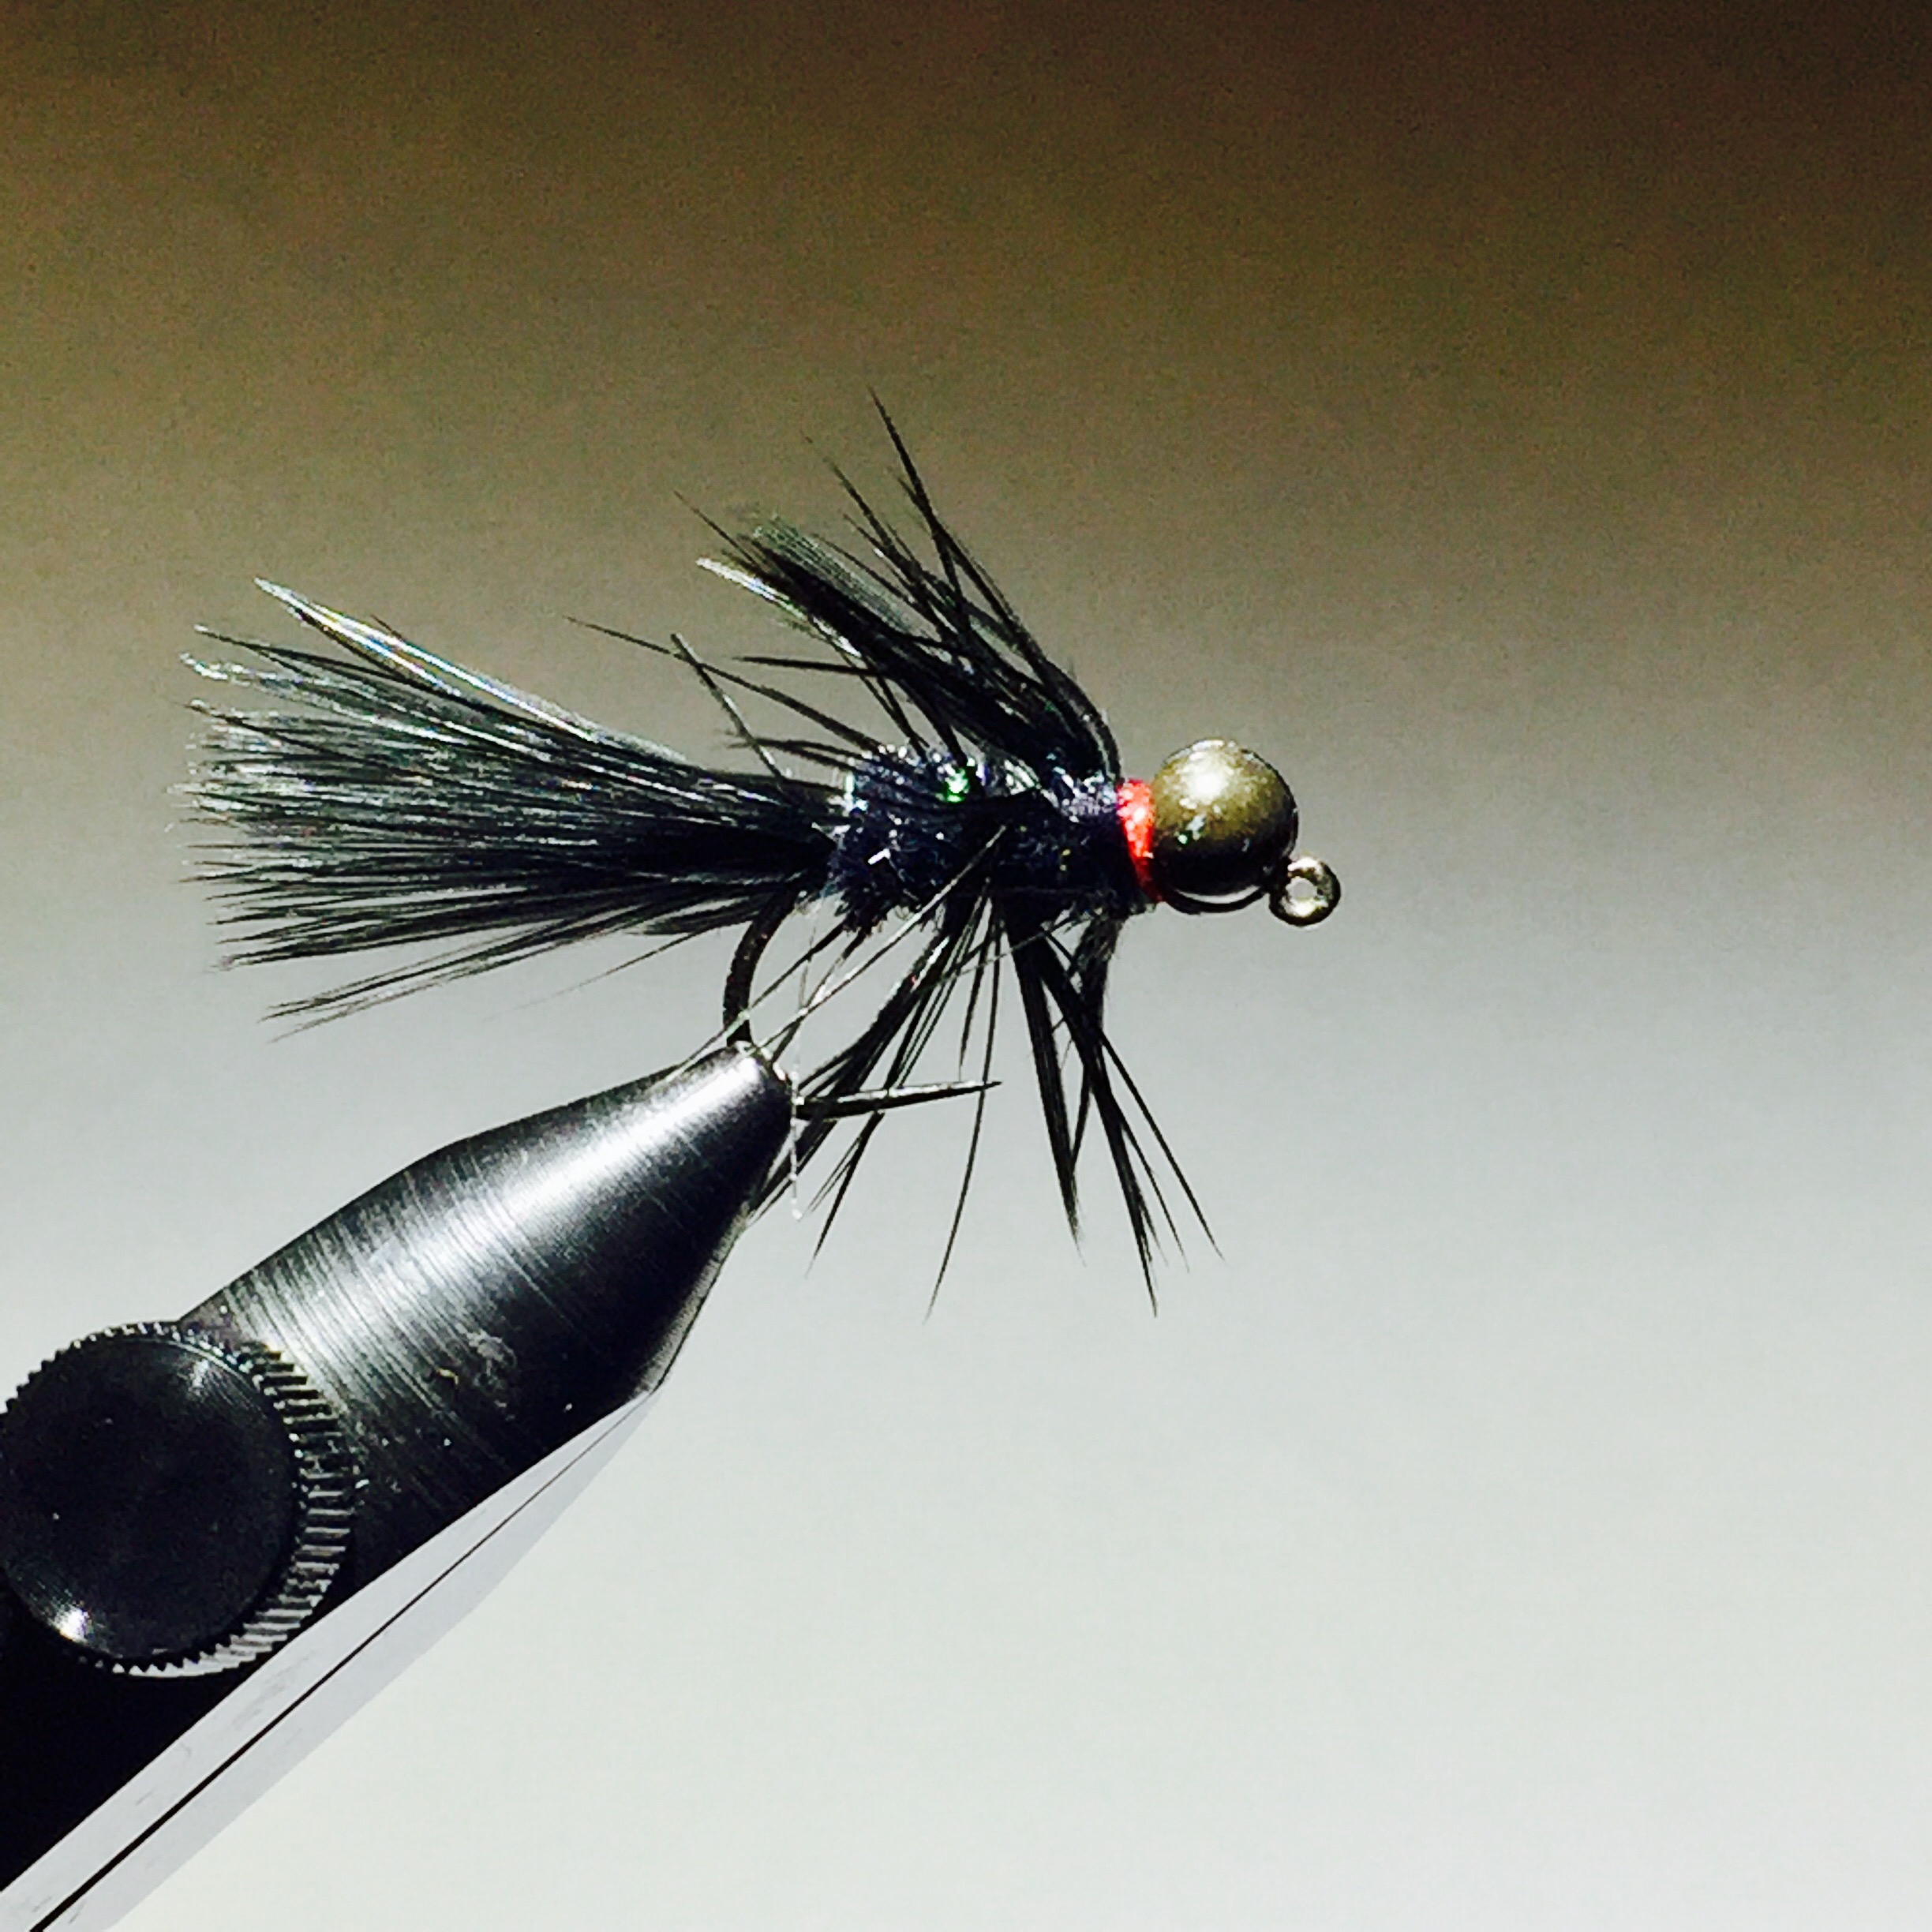 At the Bench: a Mini-Woolly Bugger –